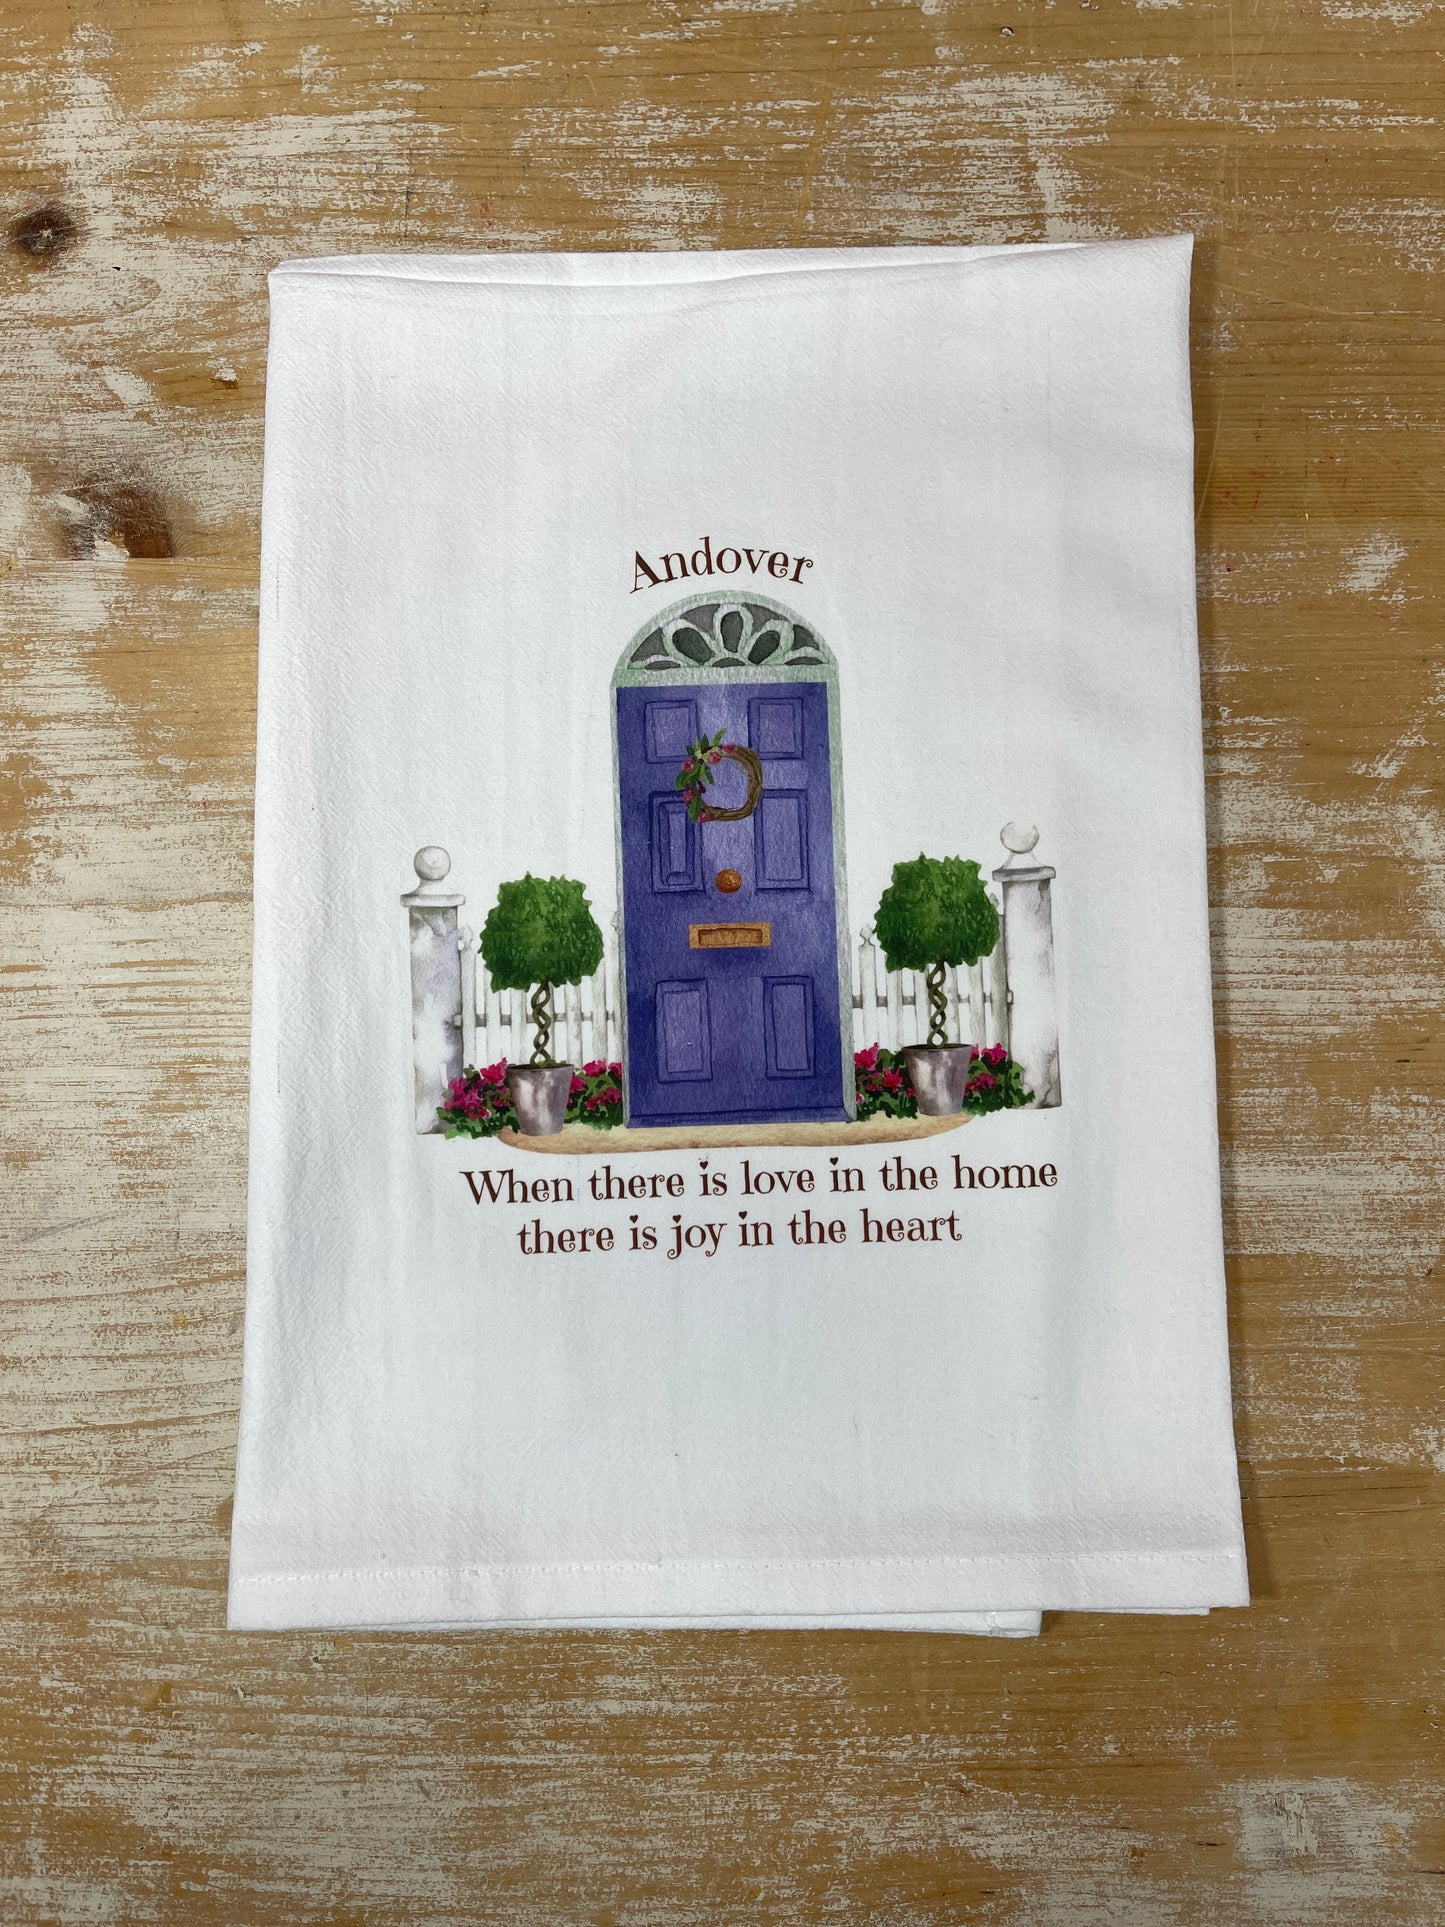 Decorative Tea Towel - When There Is Love (Andover)